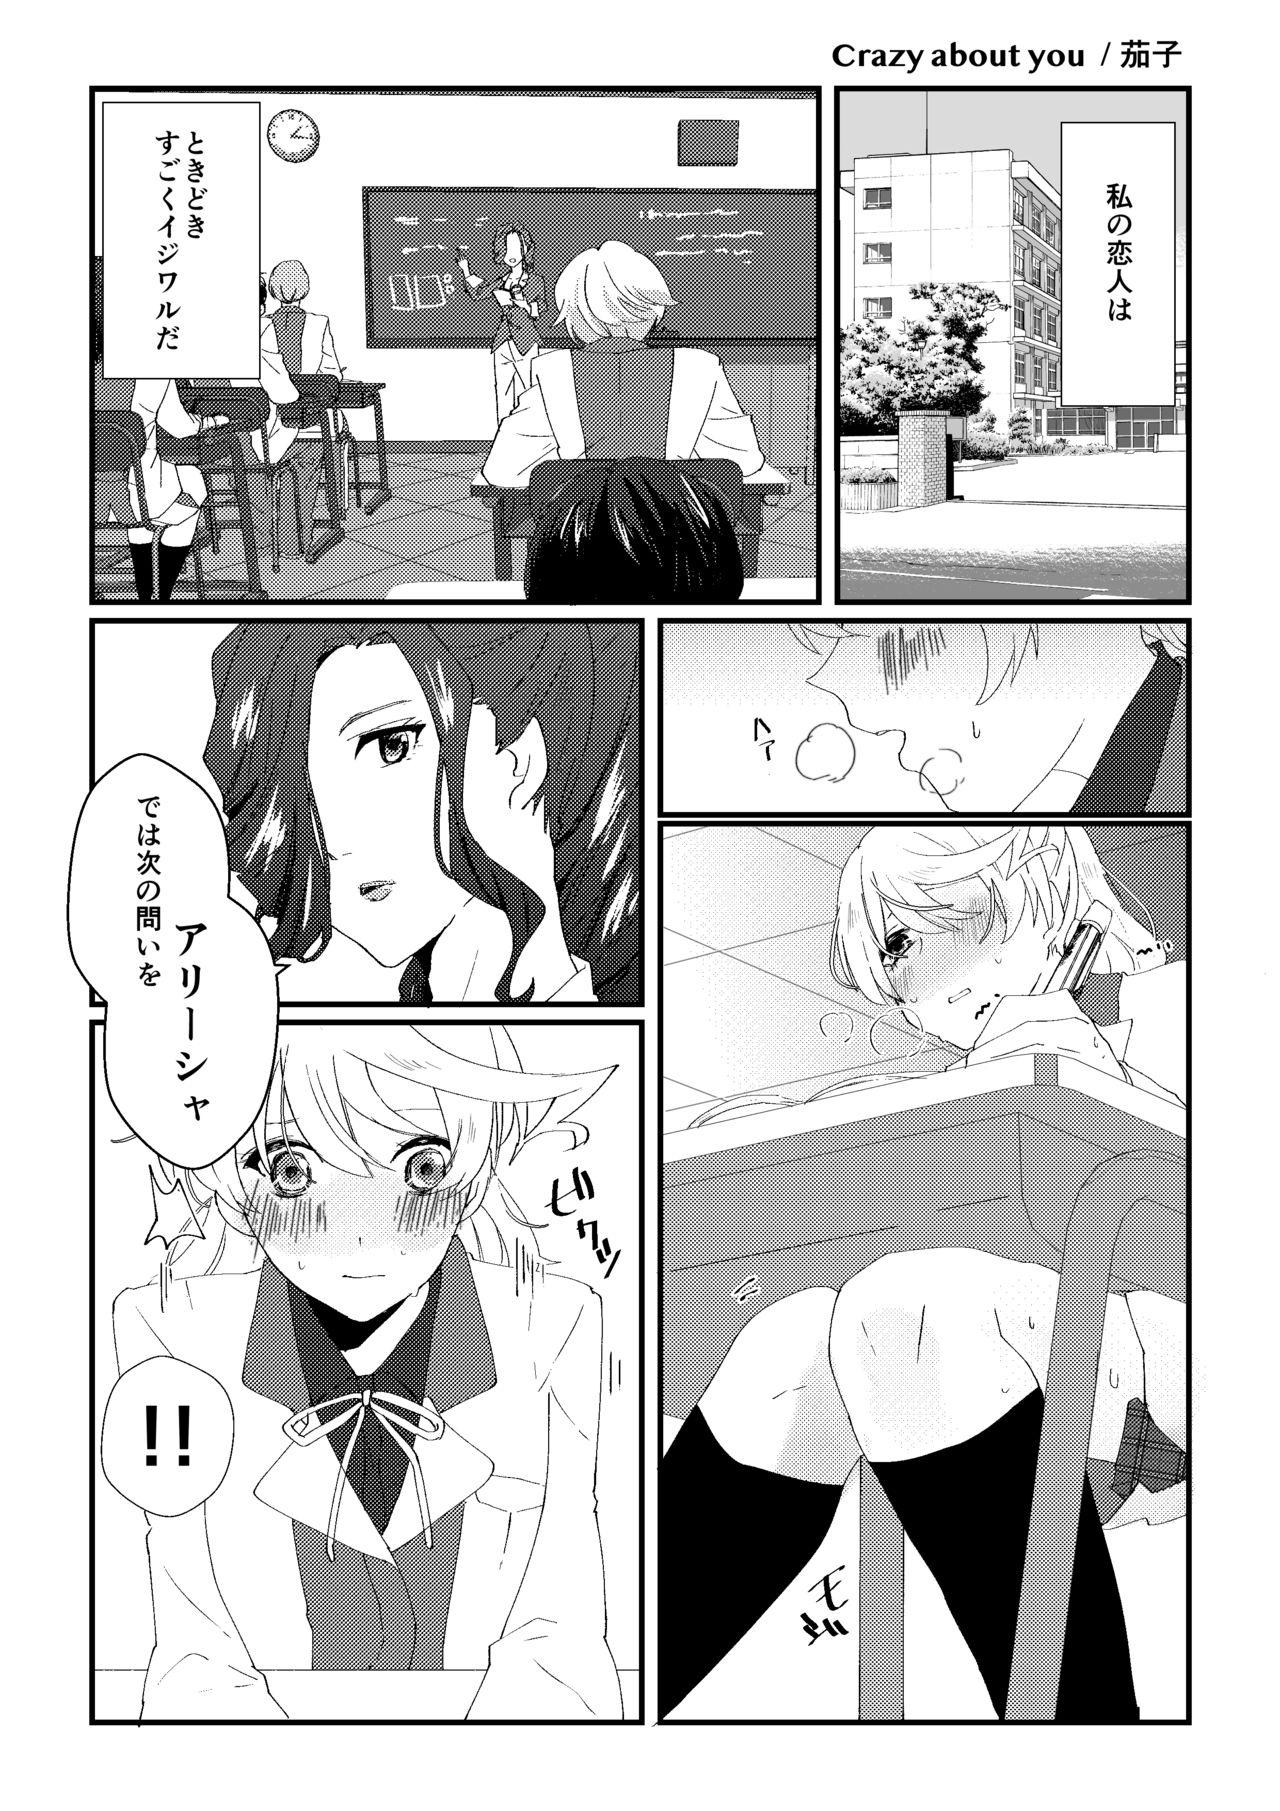 Sloppy Blowjob crazy about you - Tales of zestiria Softcore - Page 2